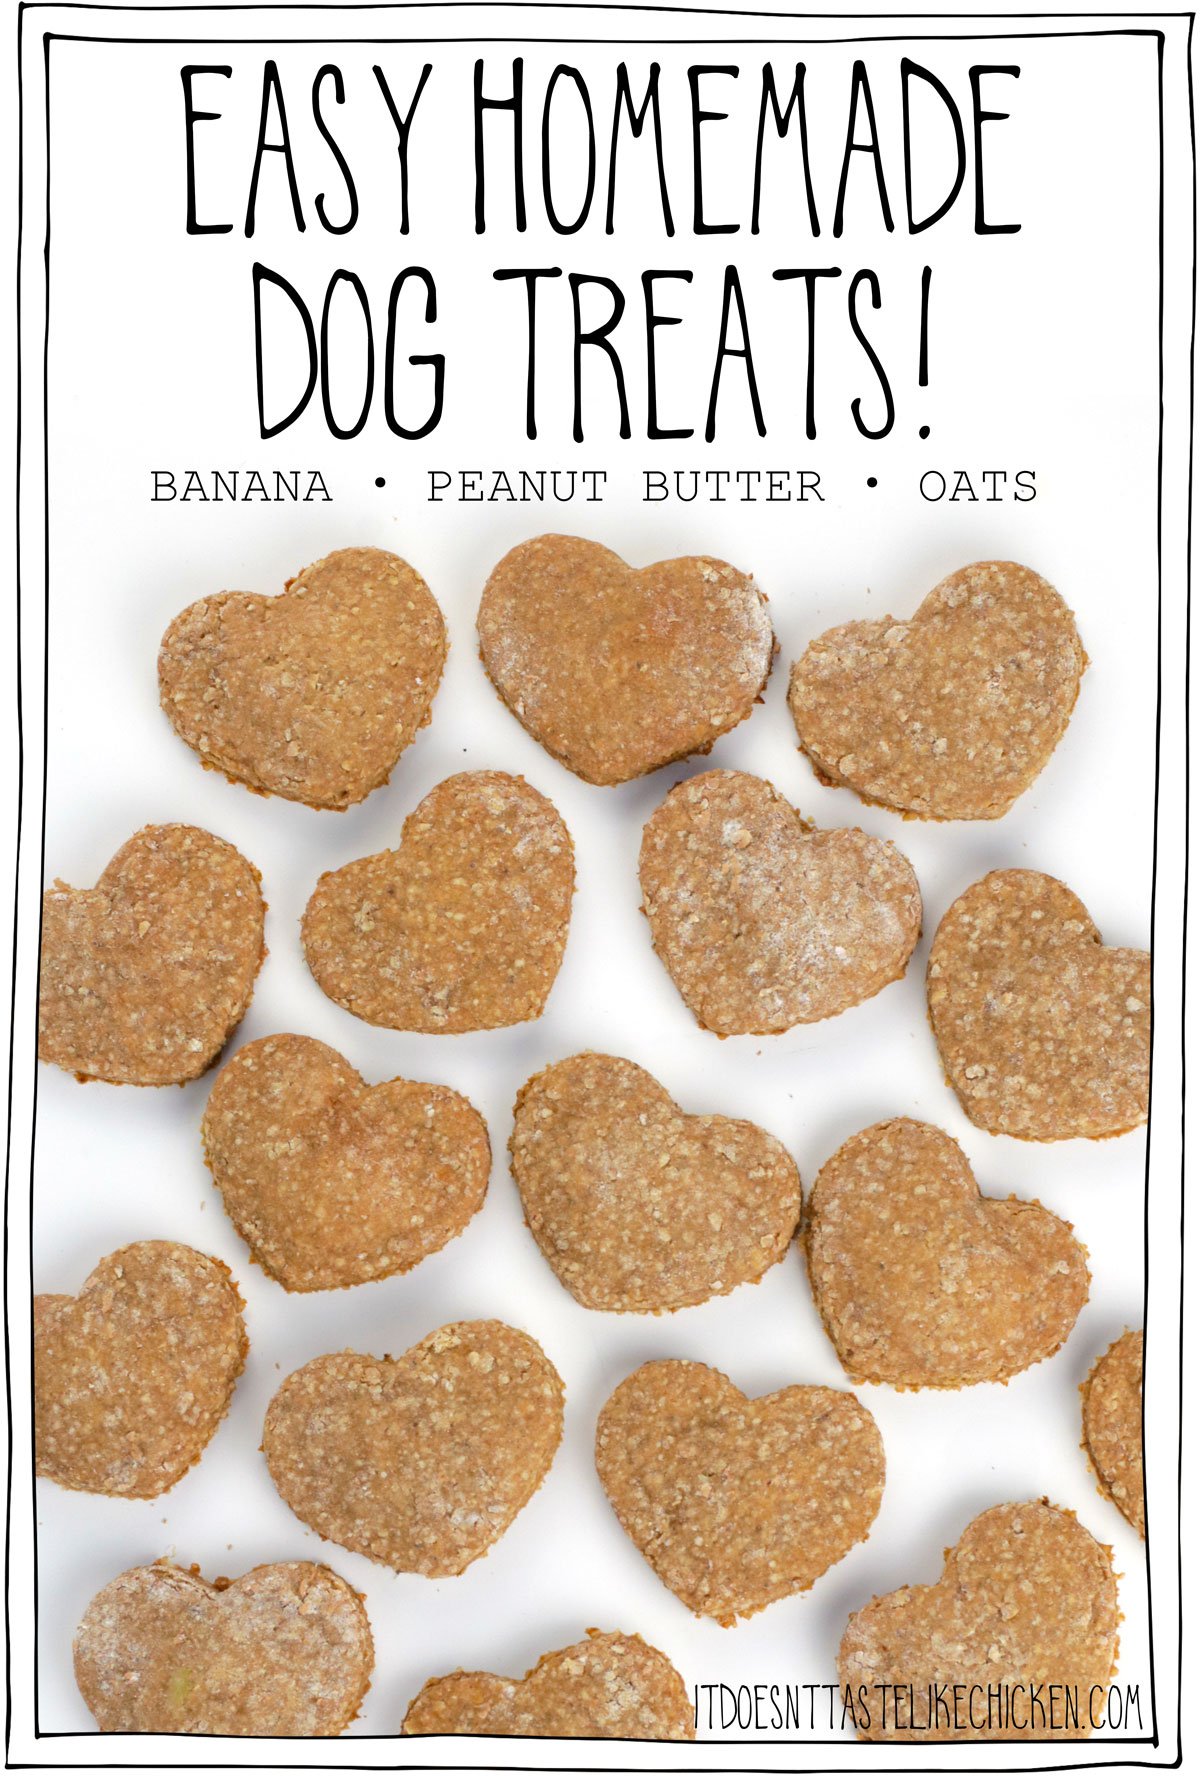 can you use a container for dog treats